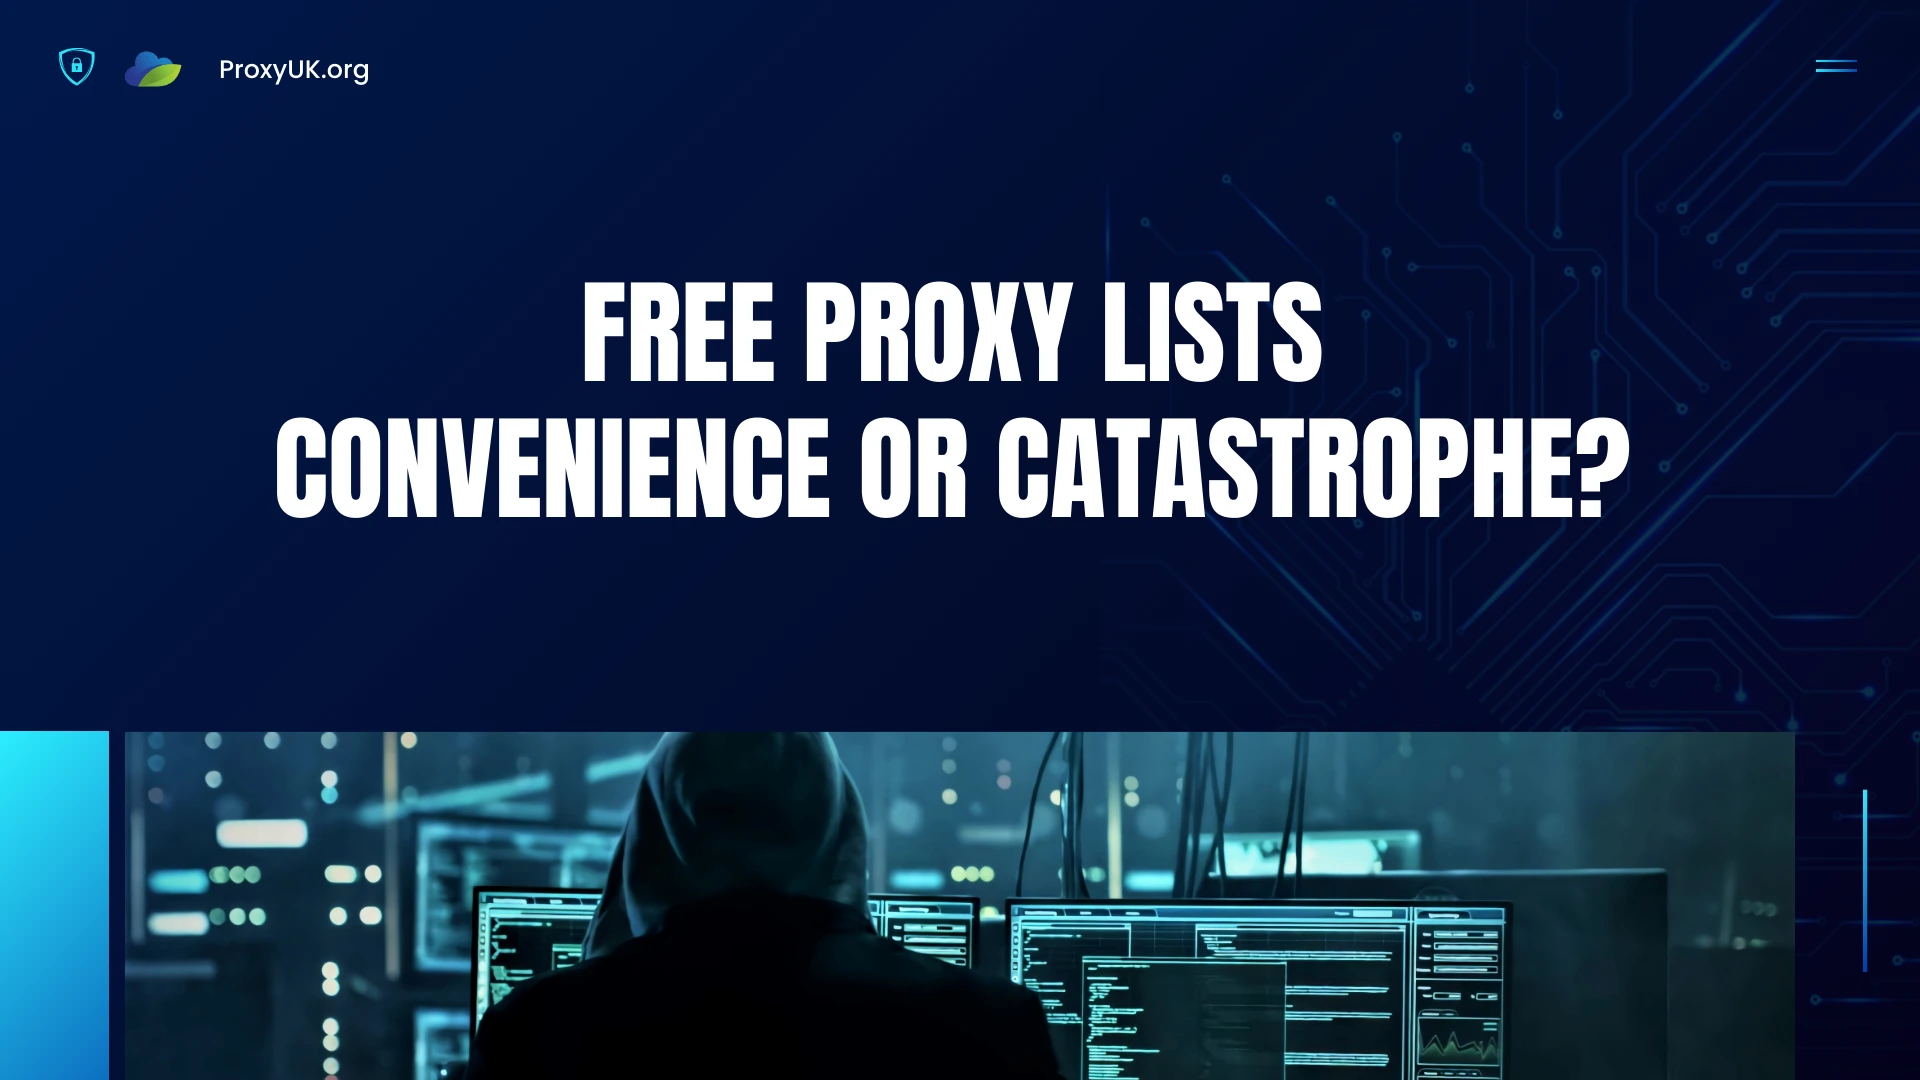 Free Proxy Lists: Convenience or Catastrophe?